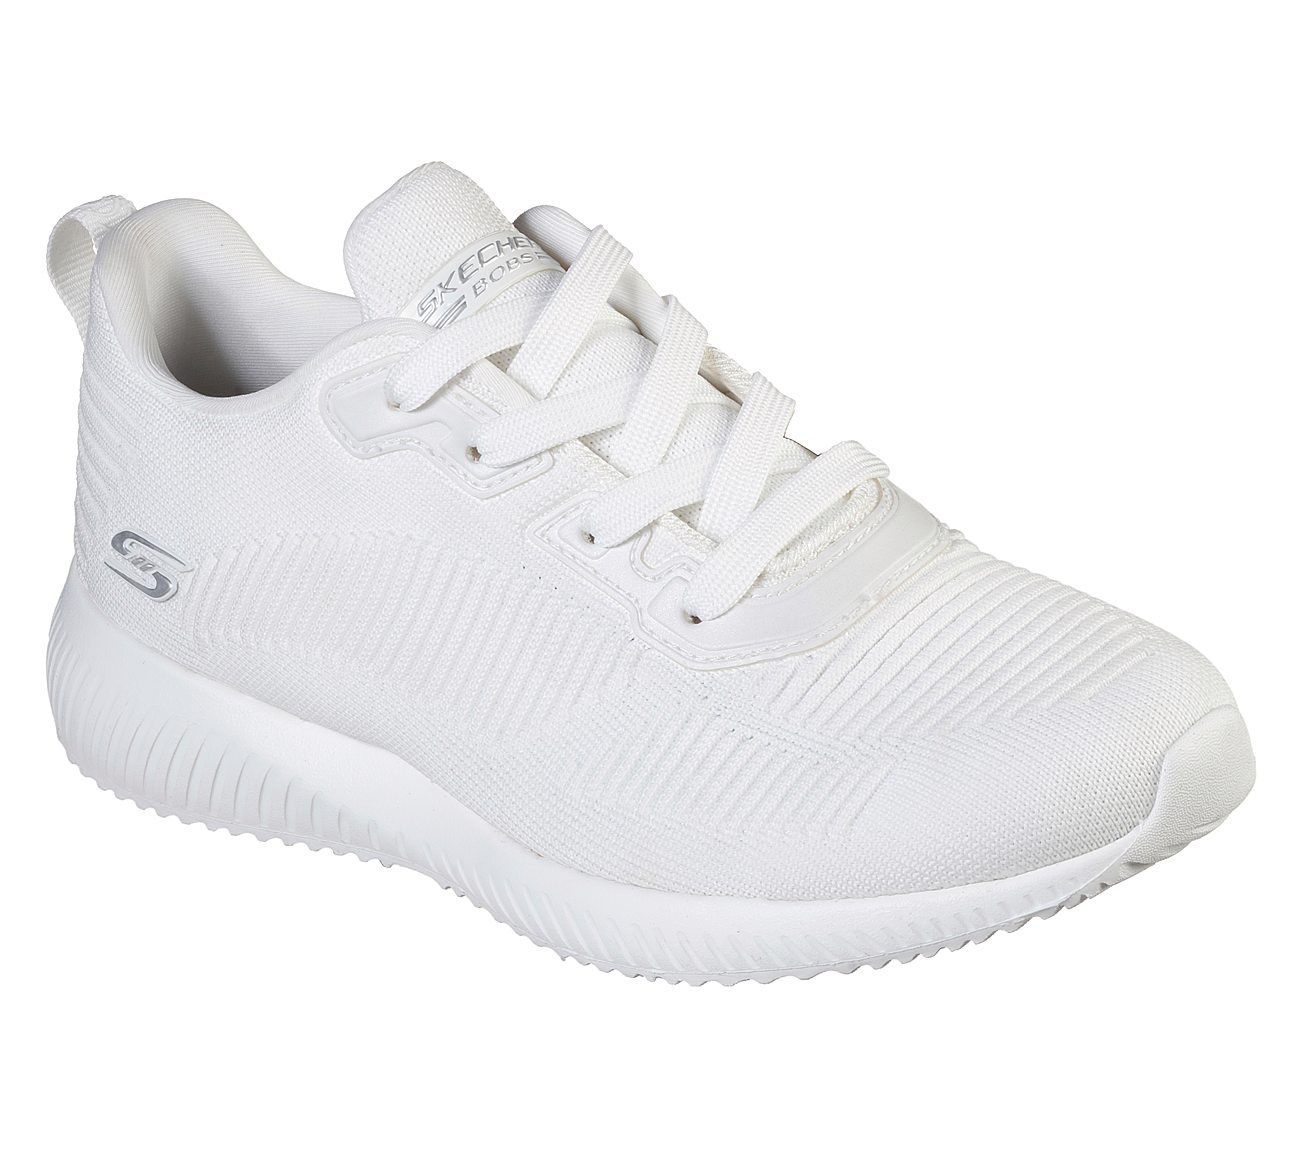 chaussures geox canada - Soldes magasin online > OFF-58%